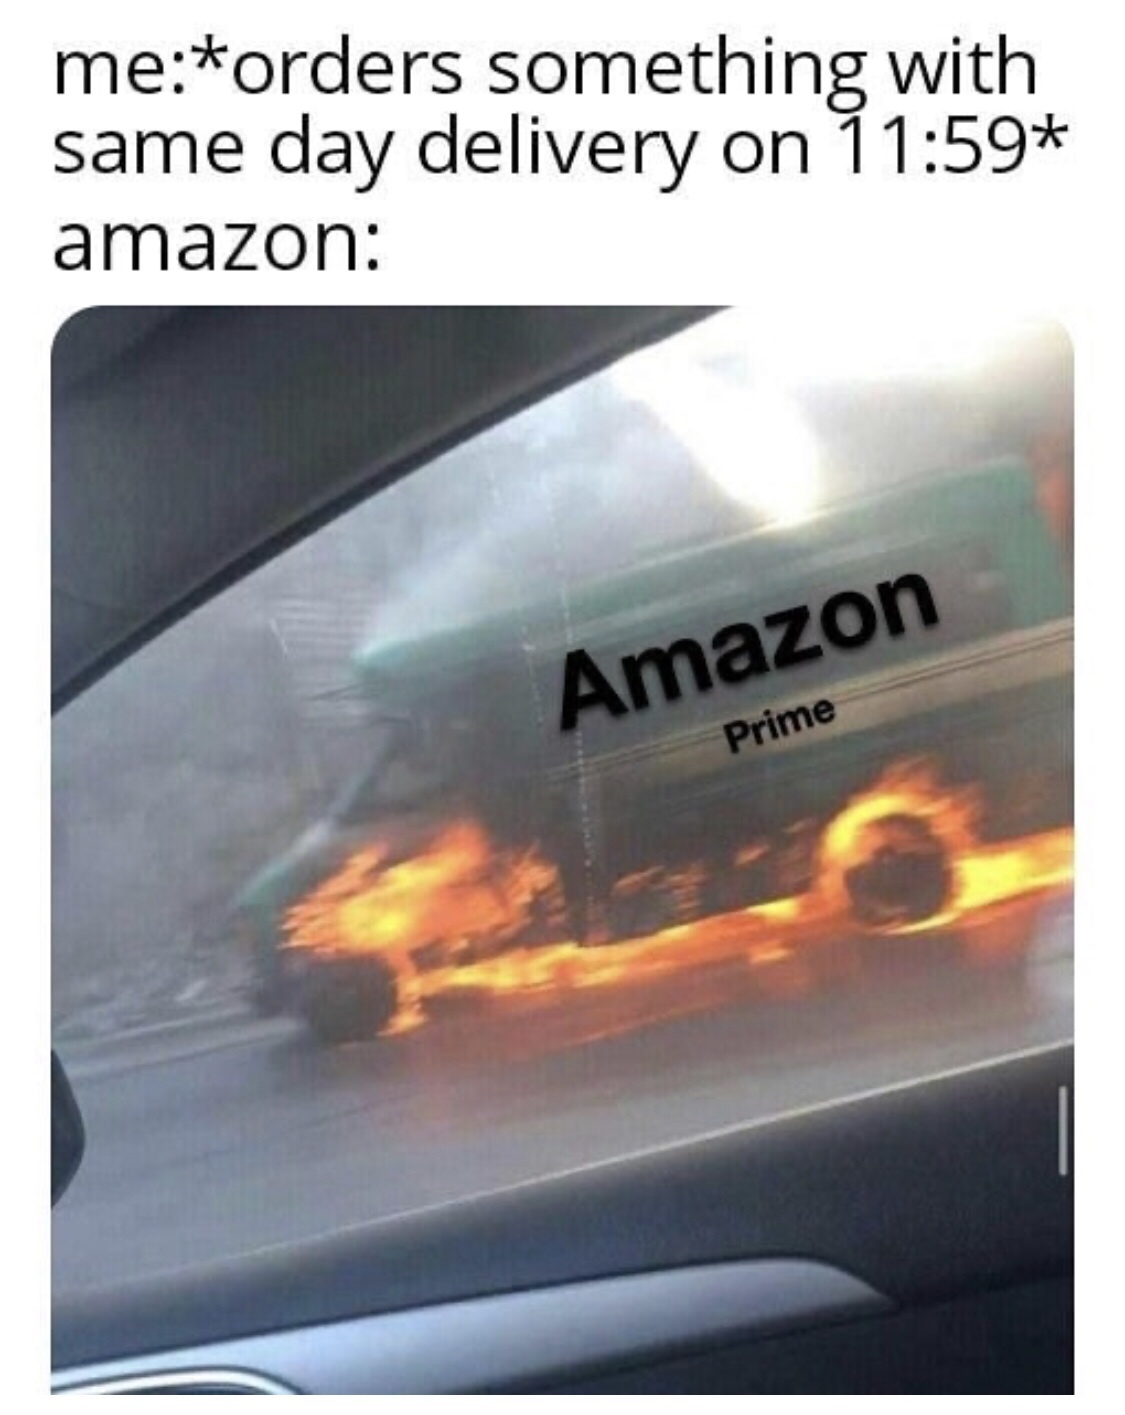 Internet meme - meorders something with same day delivery on amazon Amazon Prime